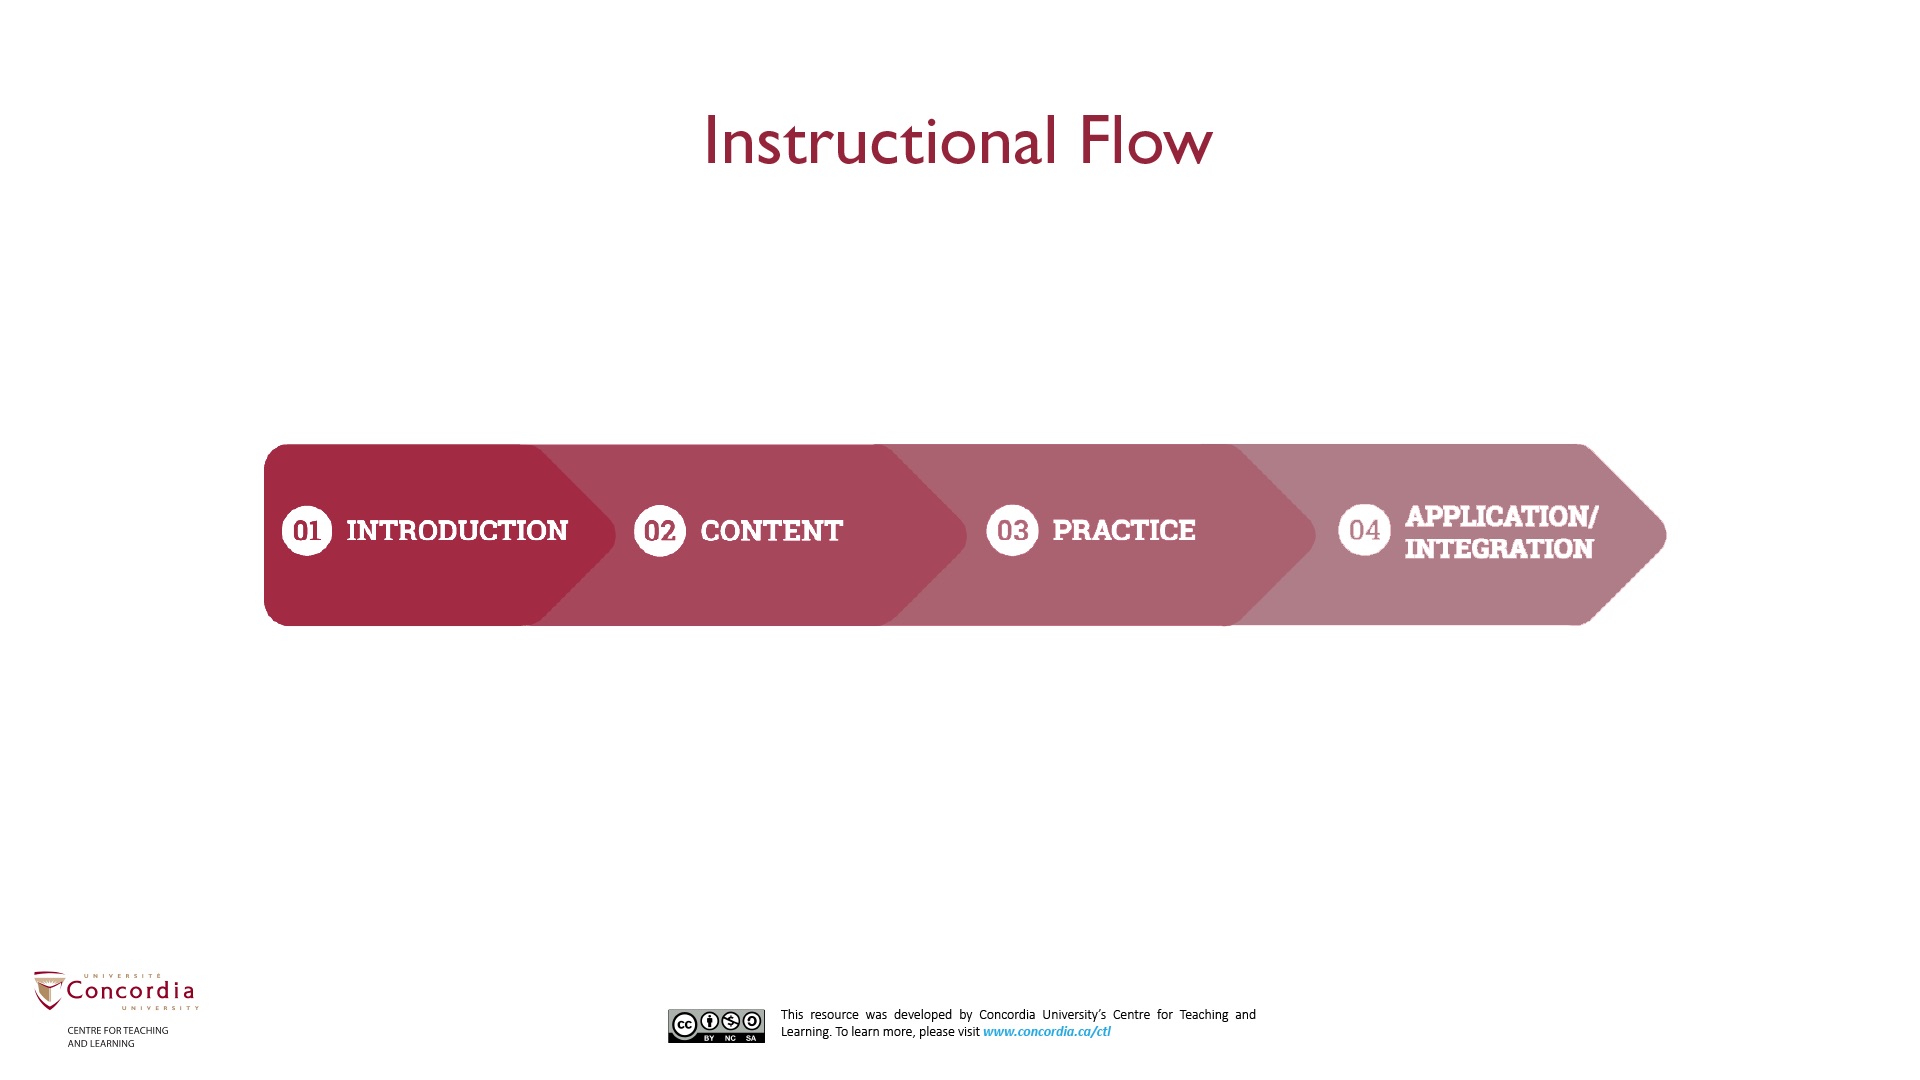 Four sequential phases of instructional flow: introduction, content, practice, and application or integration.